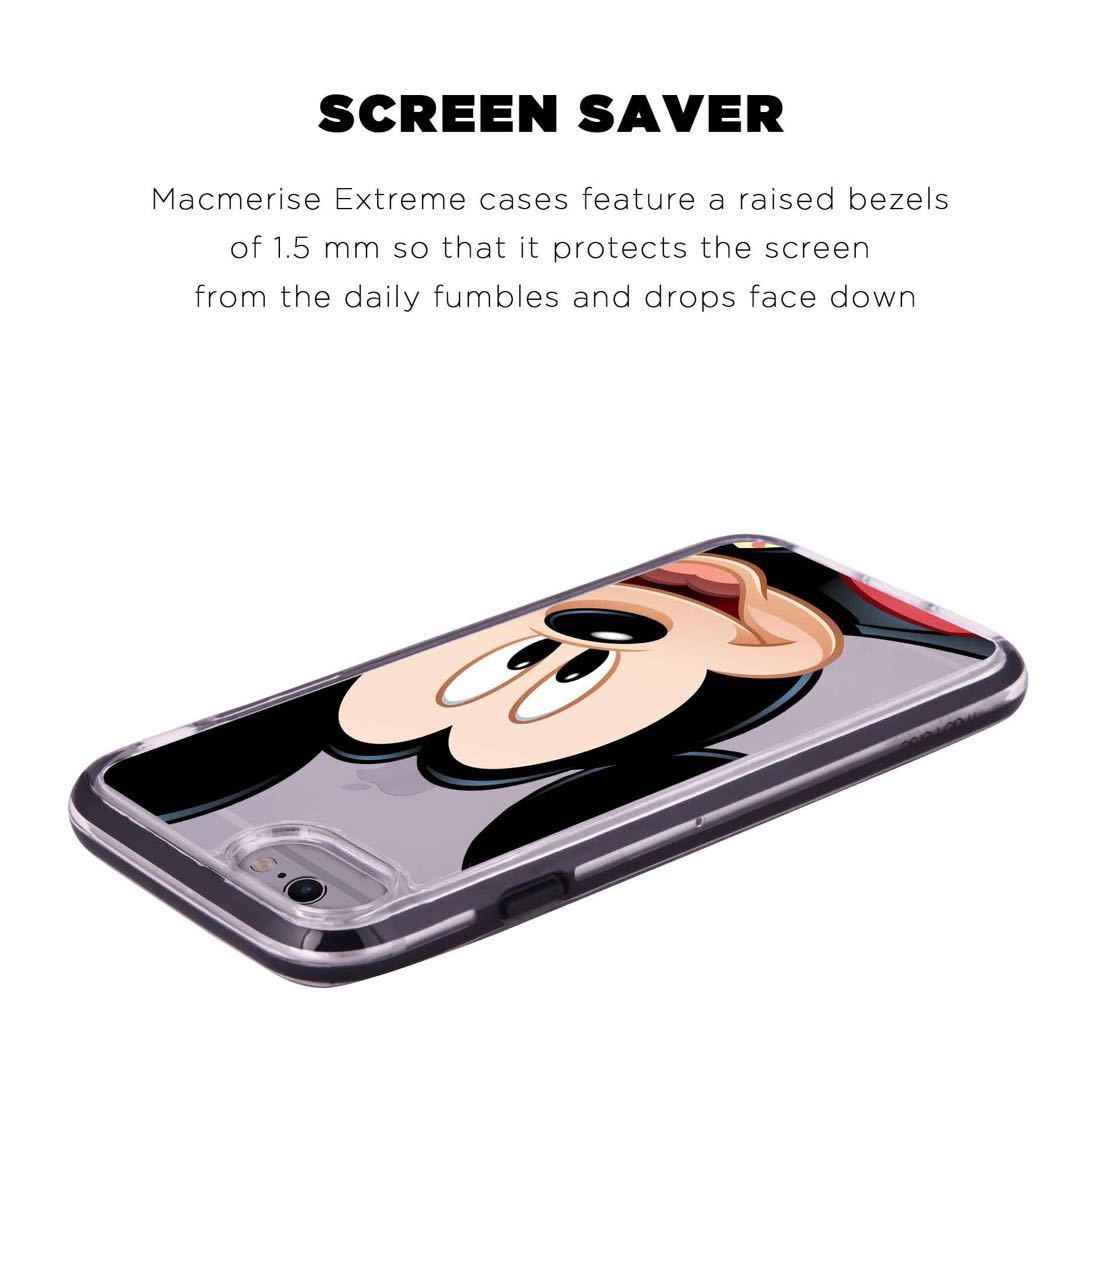 Zoom Up Mickey - Extreme Phone Case for iPhone 6 Plus